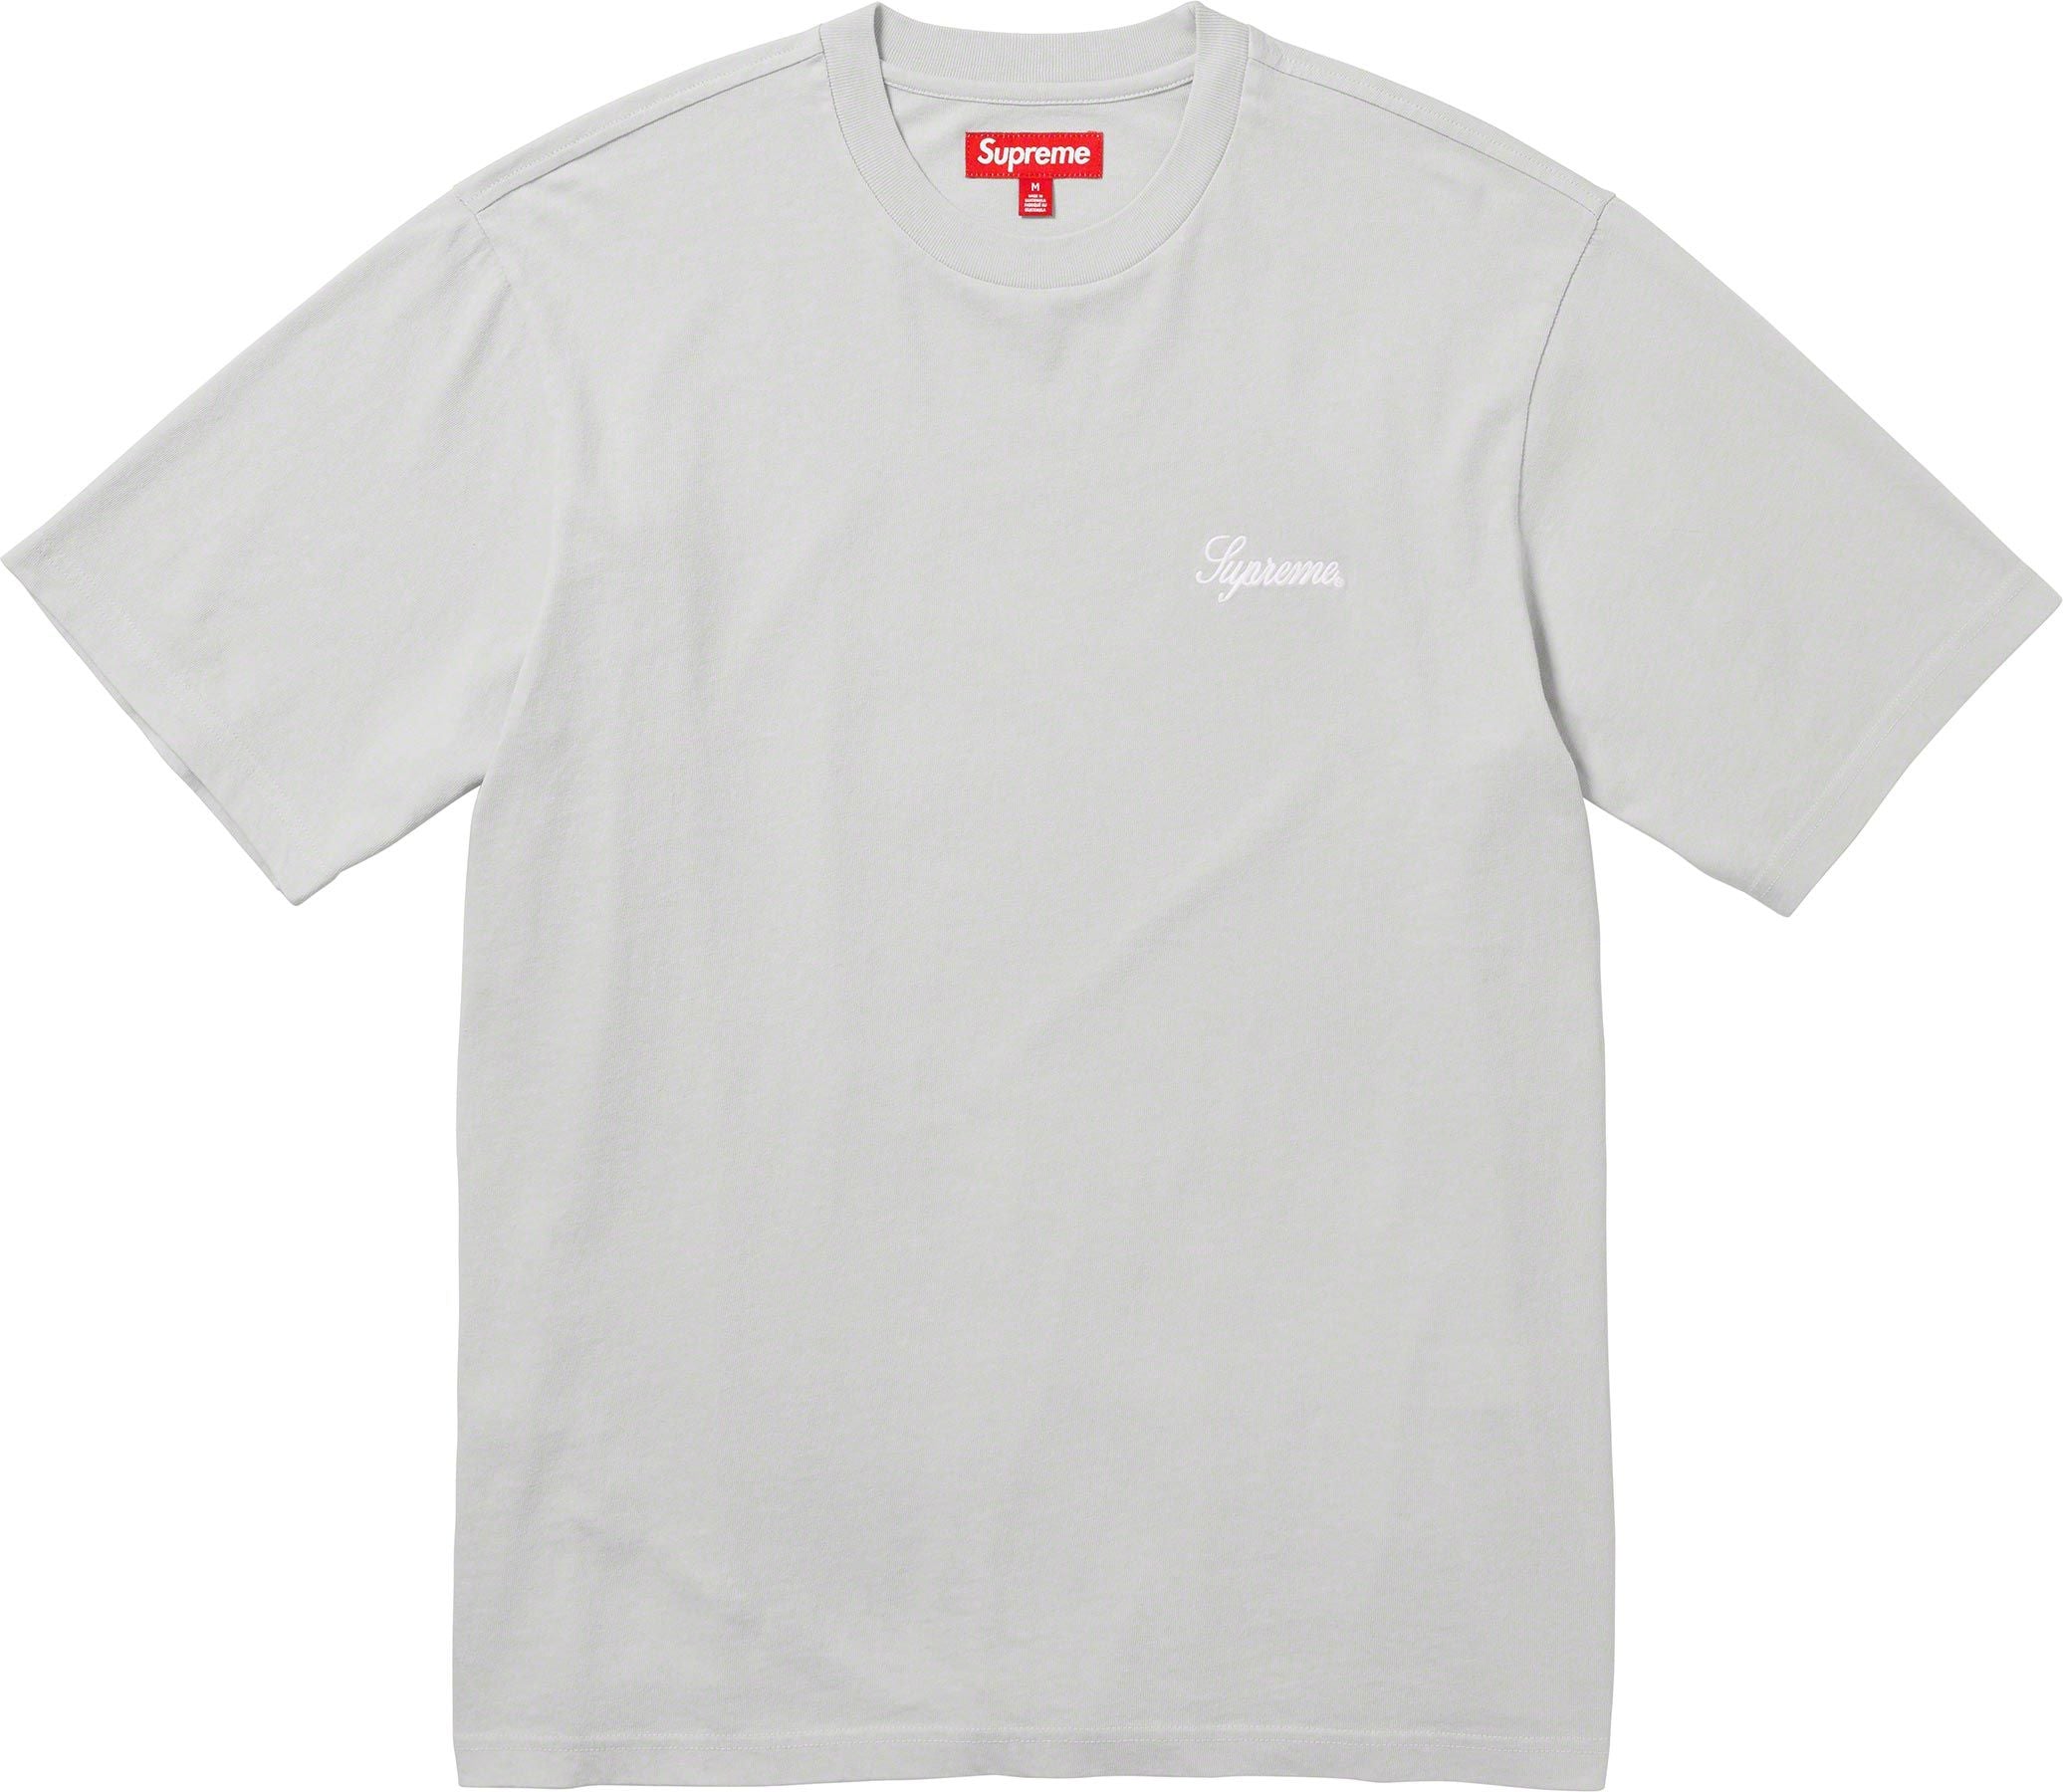 Supreme Washed Script S/S T-Shirt (Grey)